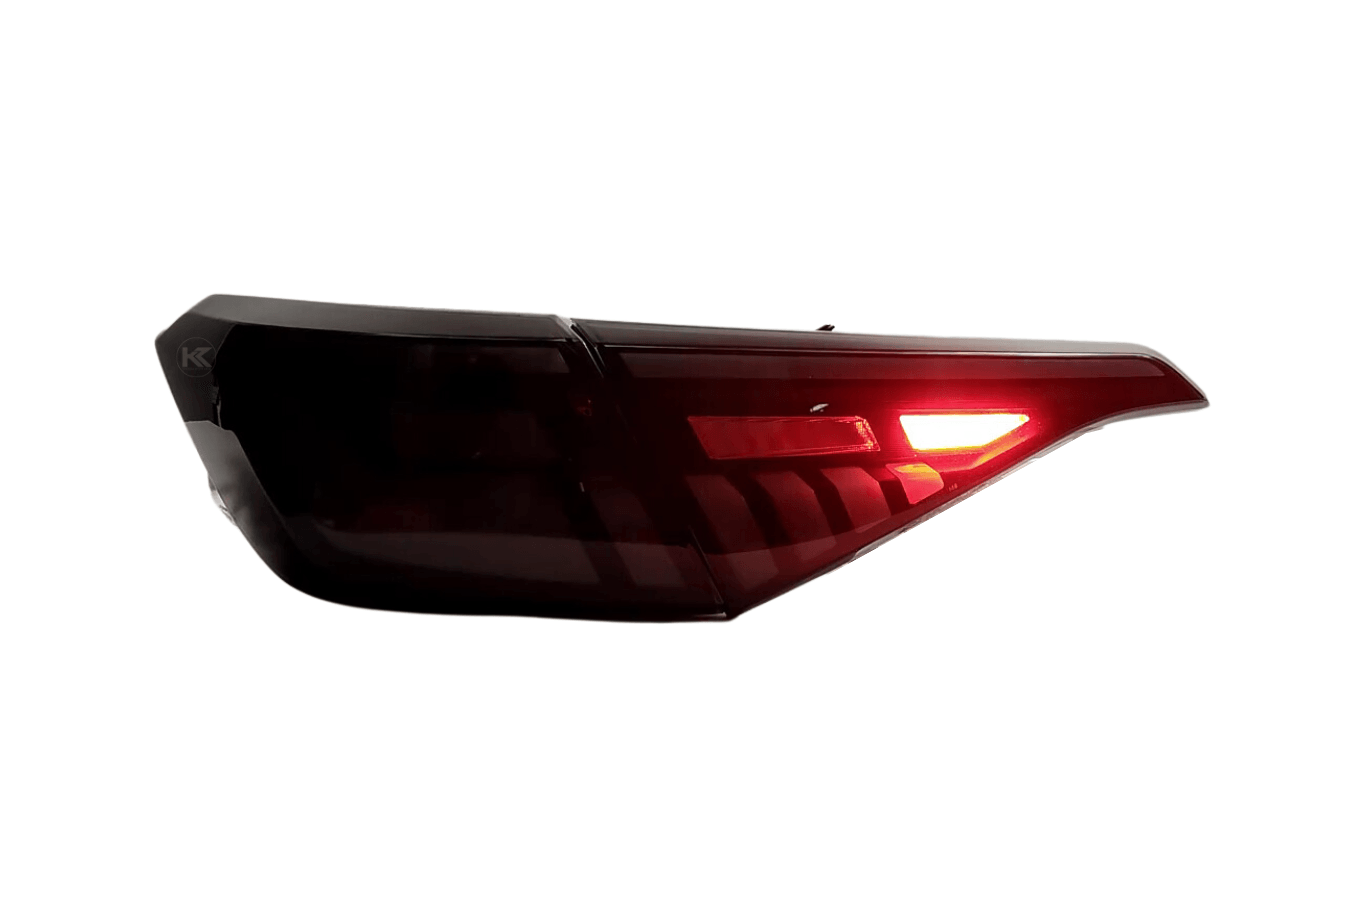 Honda Civic 11th Gen RGB LED Tail Lights with Animation 2021-2023 - K2 Industries